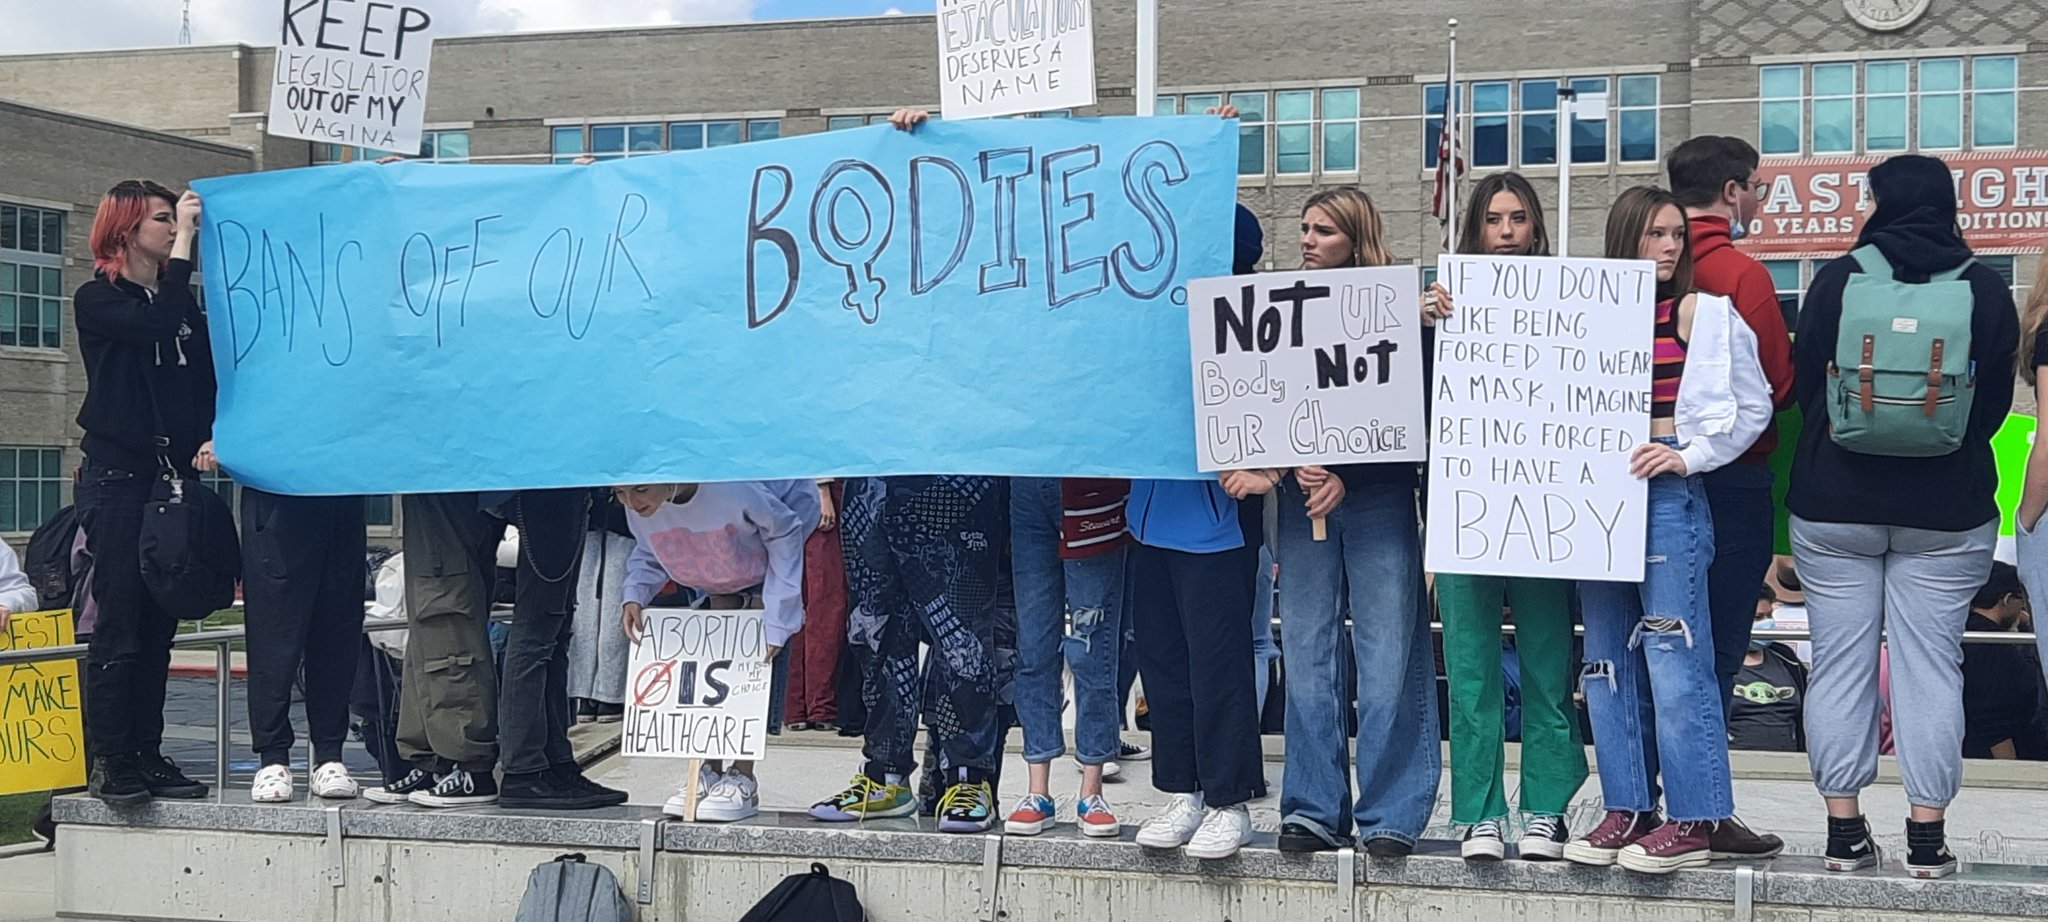 East High School students took part in a walkout to protest the overturning of Roe V. Wade.
Photo: ...